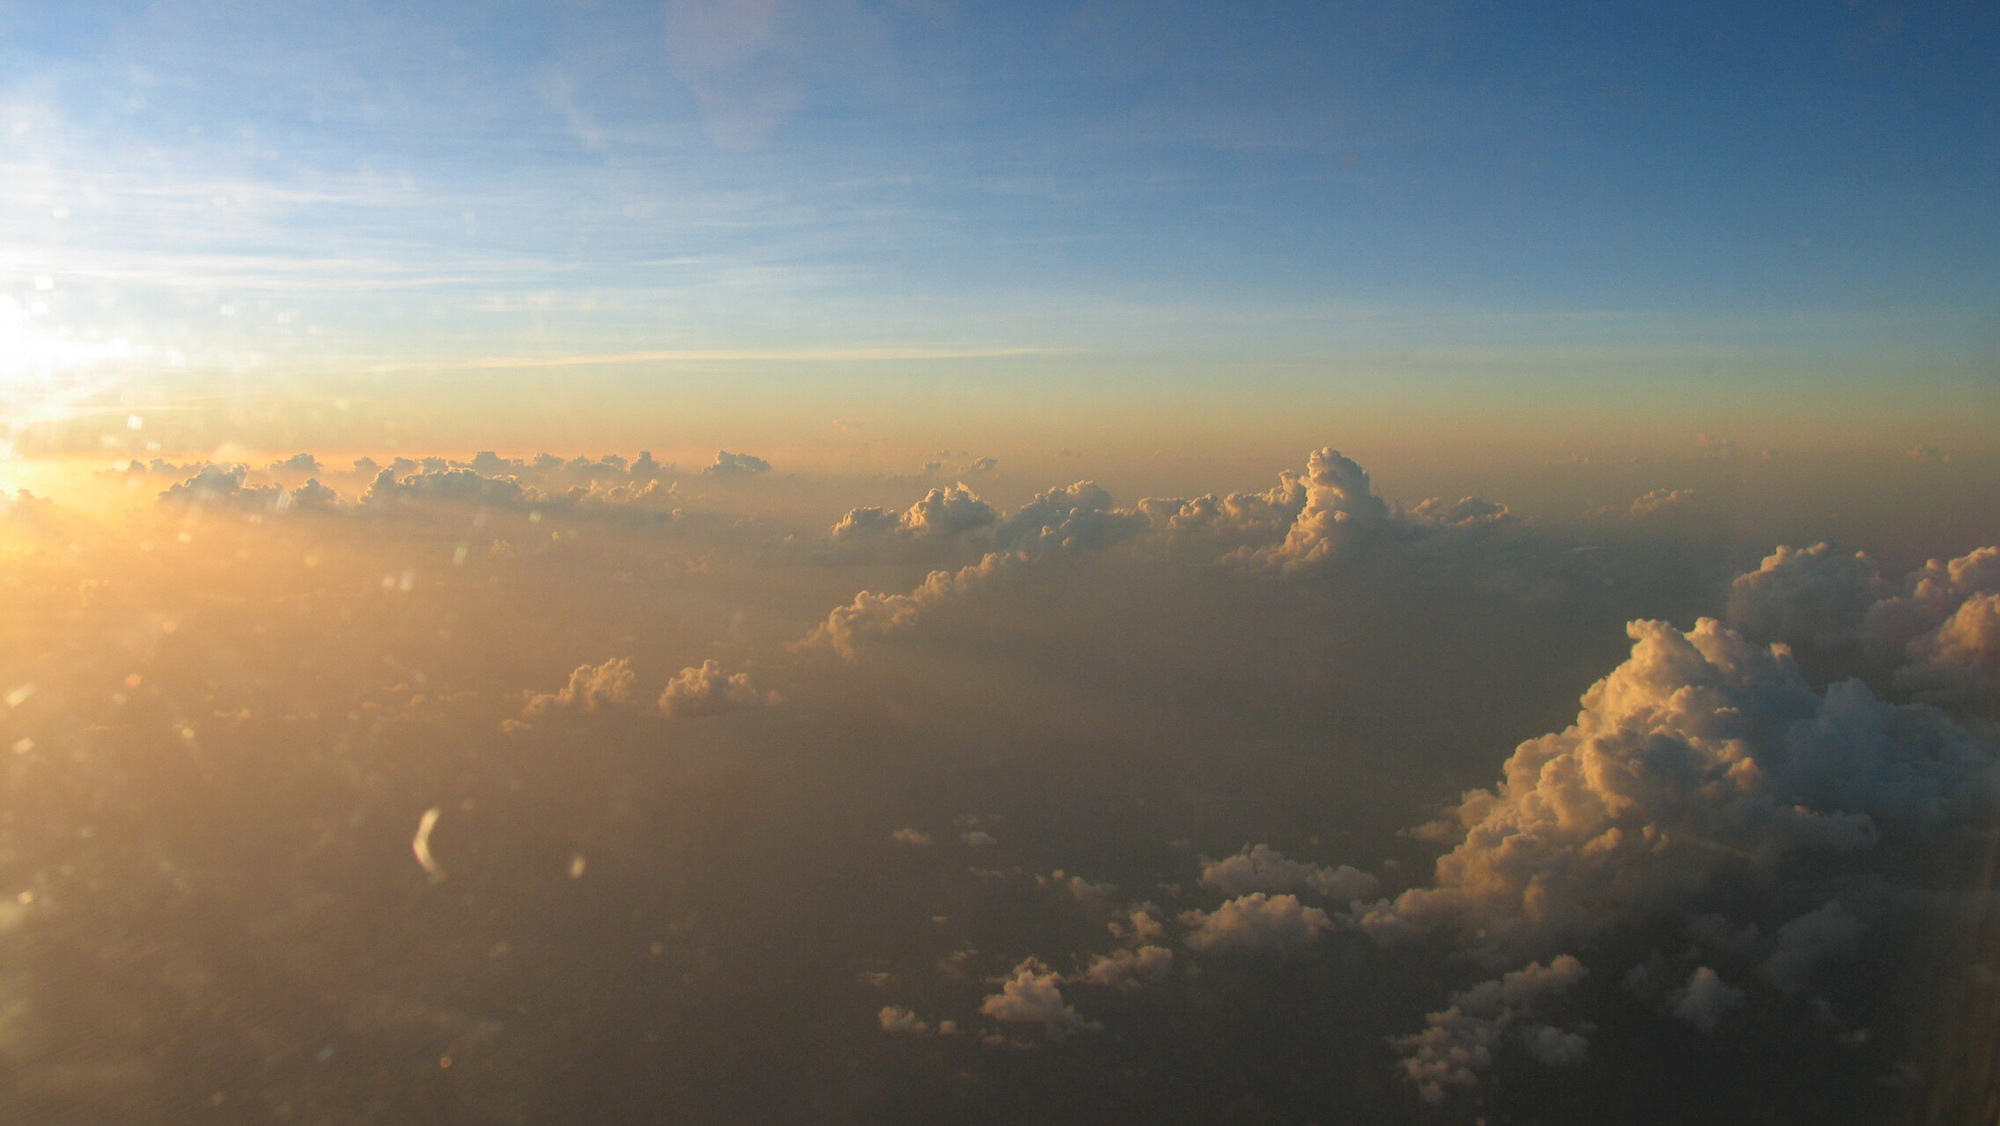 A photo of an air layer and dust-filled clouds, taken at elevation and facing the sun on the horizon.